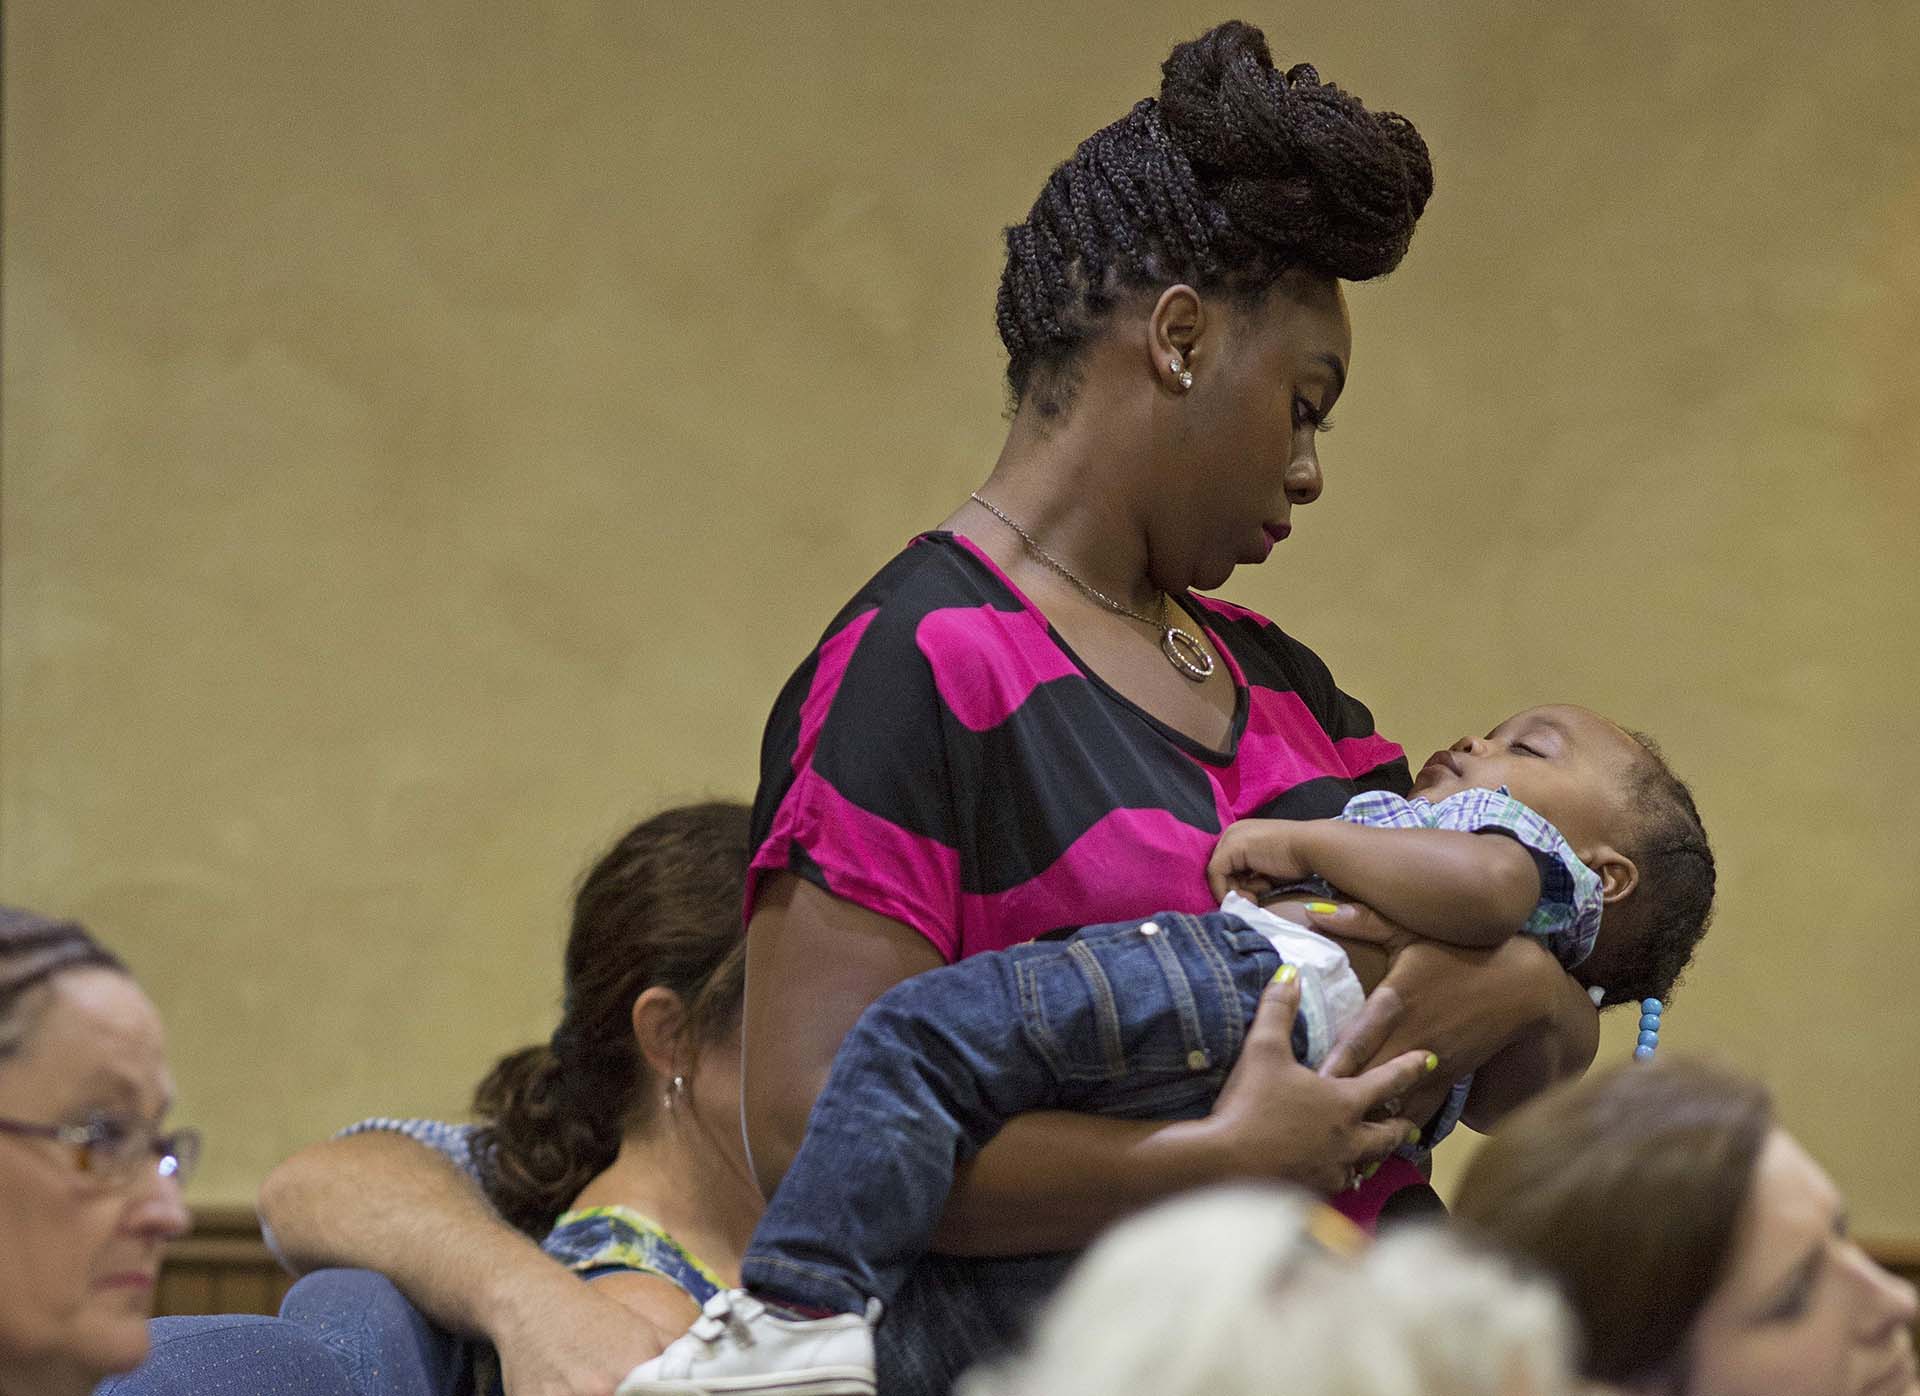 Naomi Clark, 27, holds her sleeping son, 1-year-old Caylei Clark, during services at South Walker Baptist Church in Walker, La., Sunday, Aug. 21, 2016. Clark said she moved to Walker two years ago with her husband who is a truck driver. Her and her two children were with her husband in the truck when the flood struck Walker last week. (AP Photo/Max Becherer)